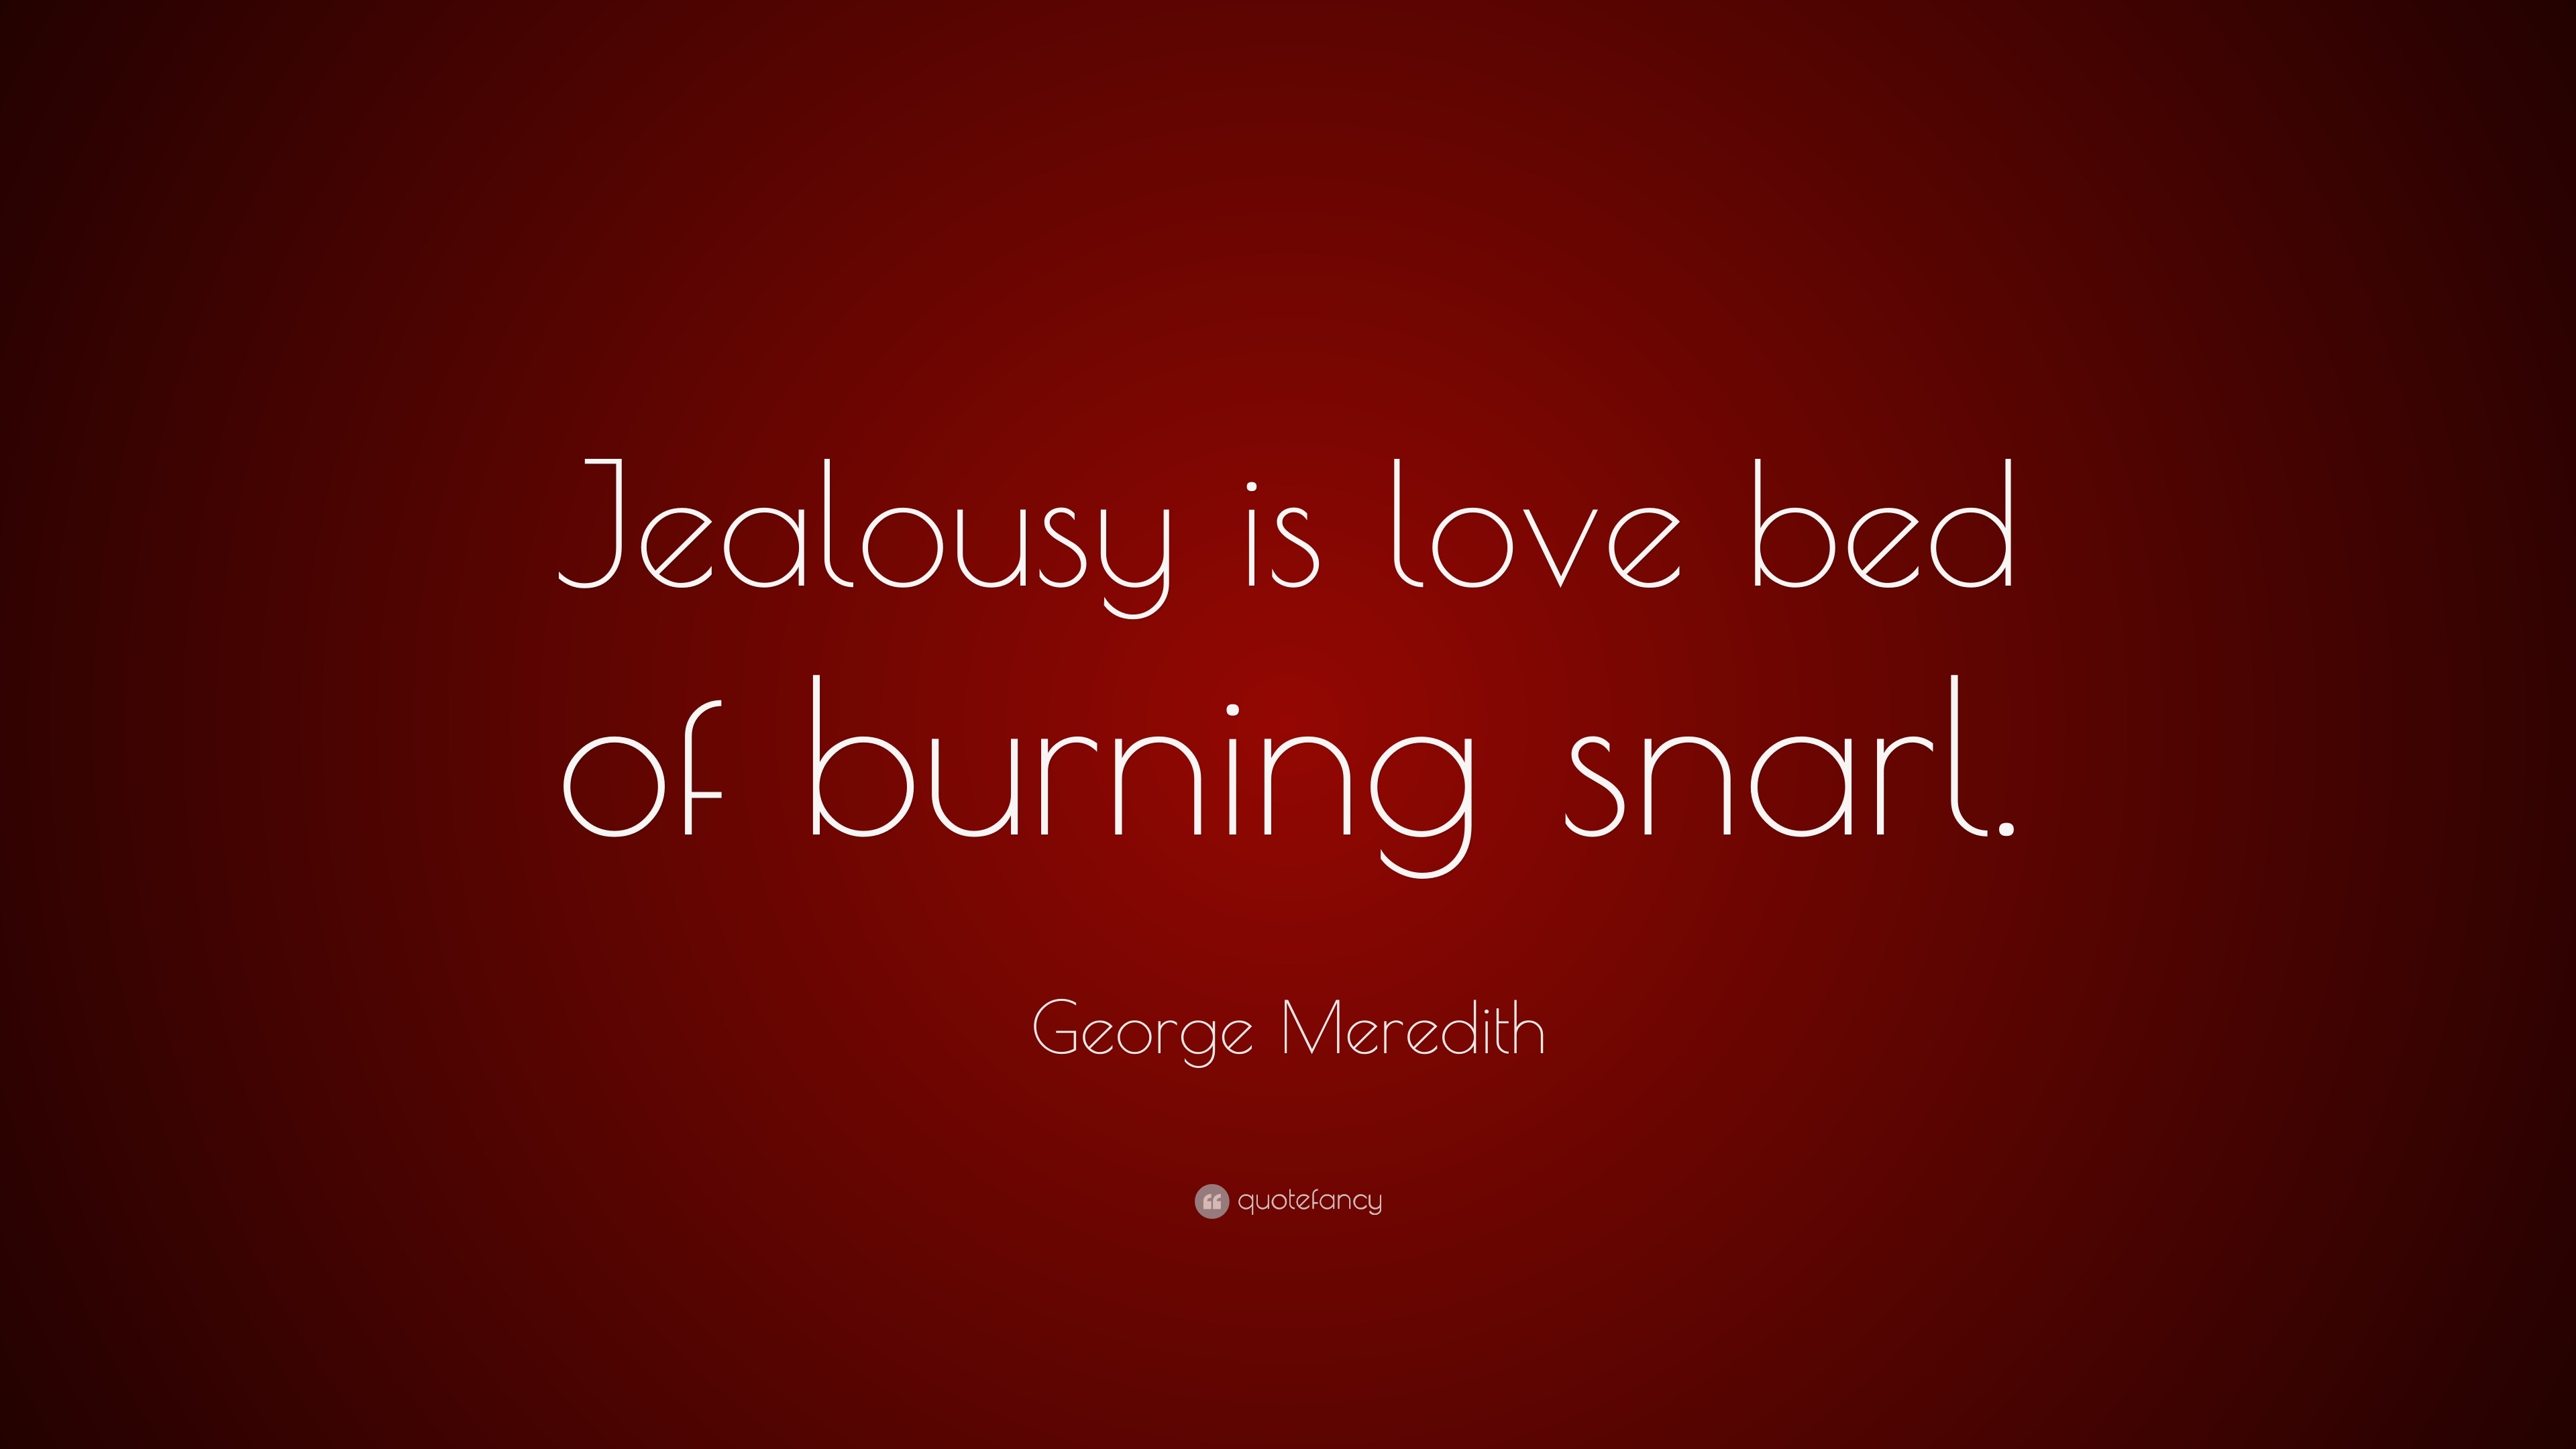 George Meredith Quote “Jealousy is love bed of burning snarl ”